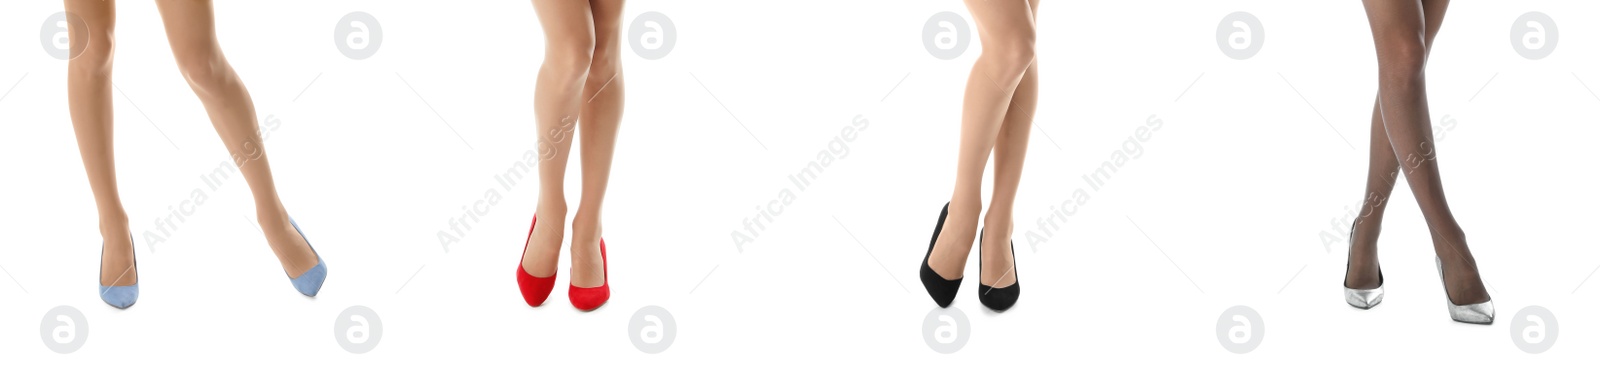 Image of Collage with photos of women wearing different stylish shoes on white background, closeup. Banner design